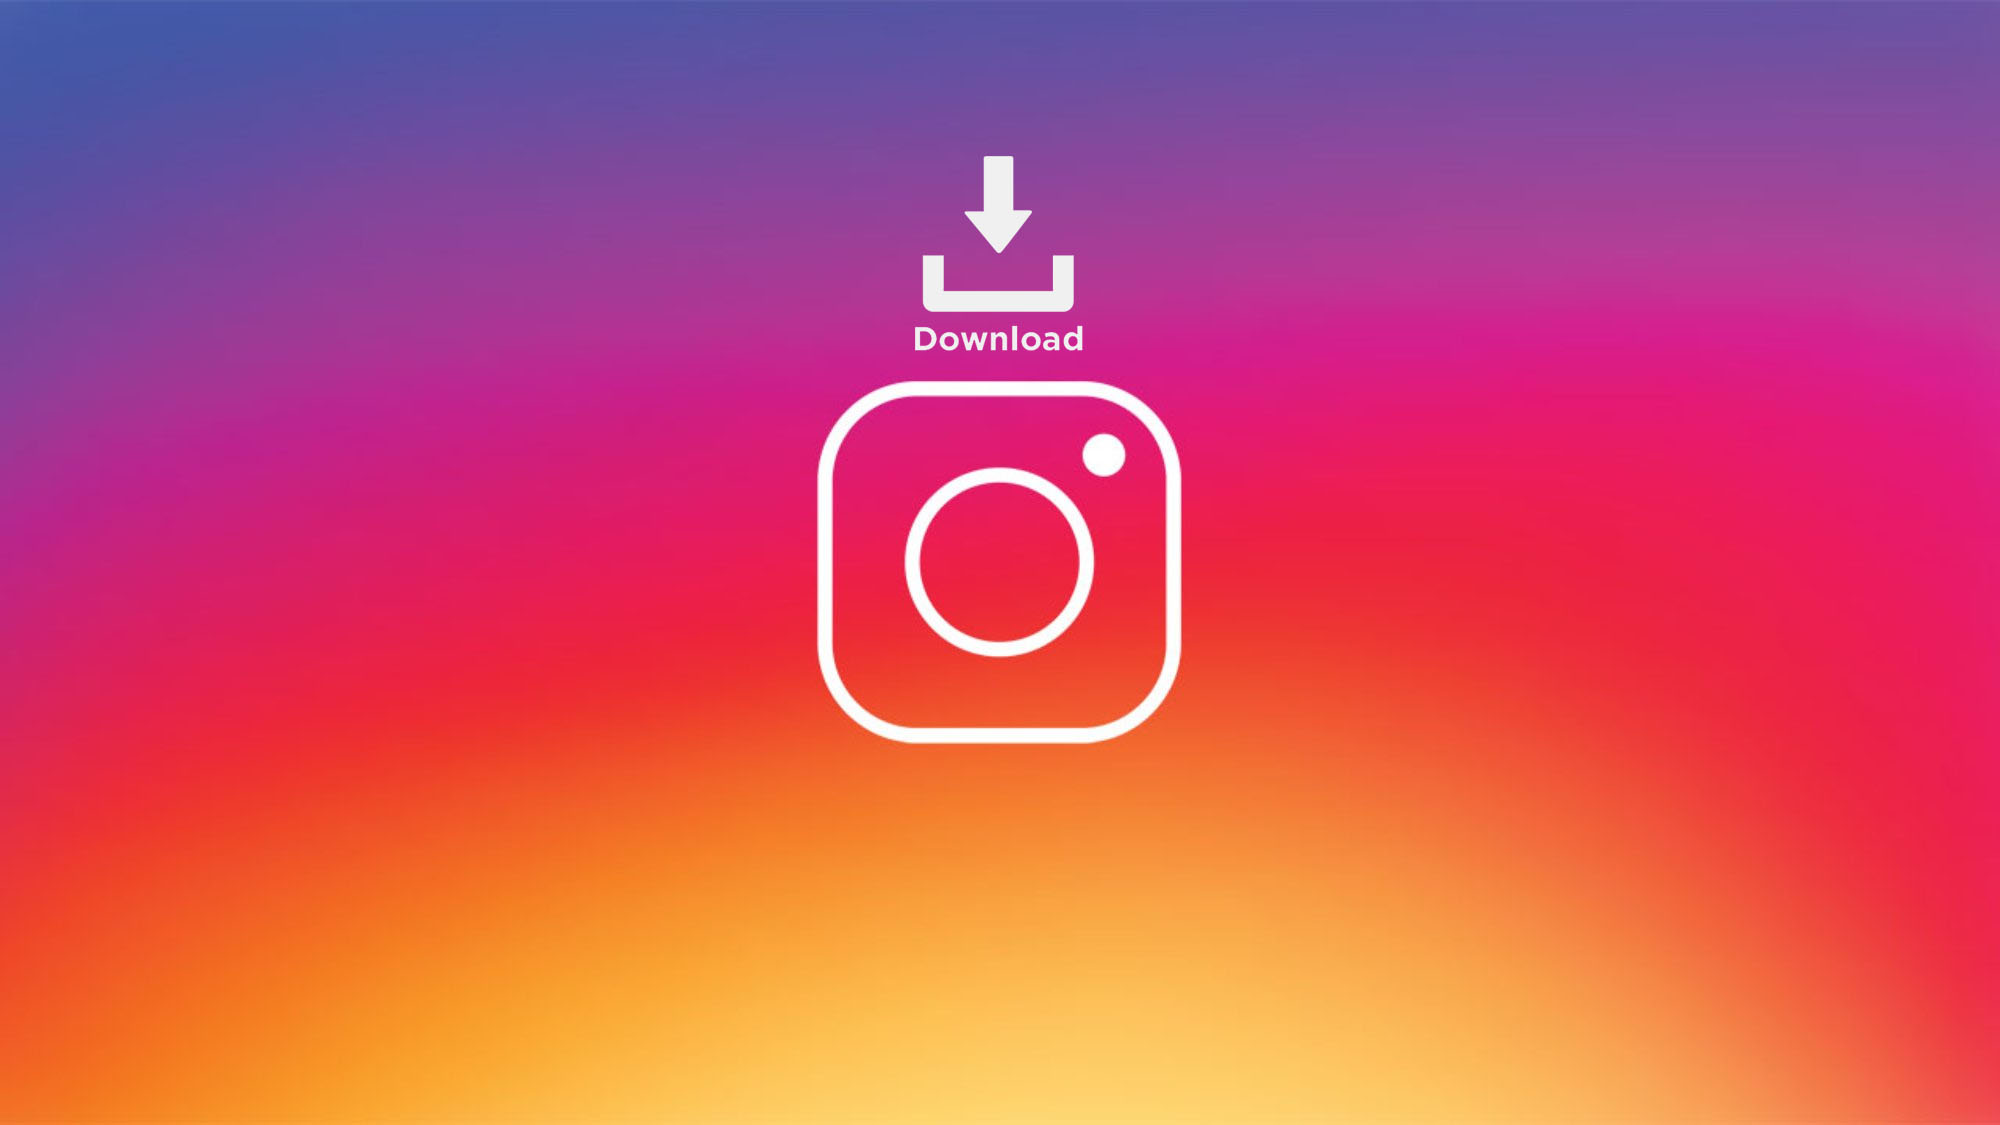  How to Download Photos from Instagram